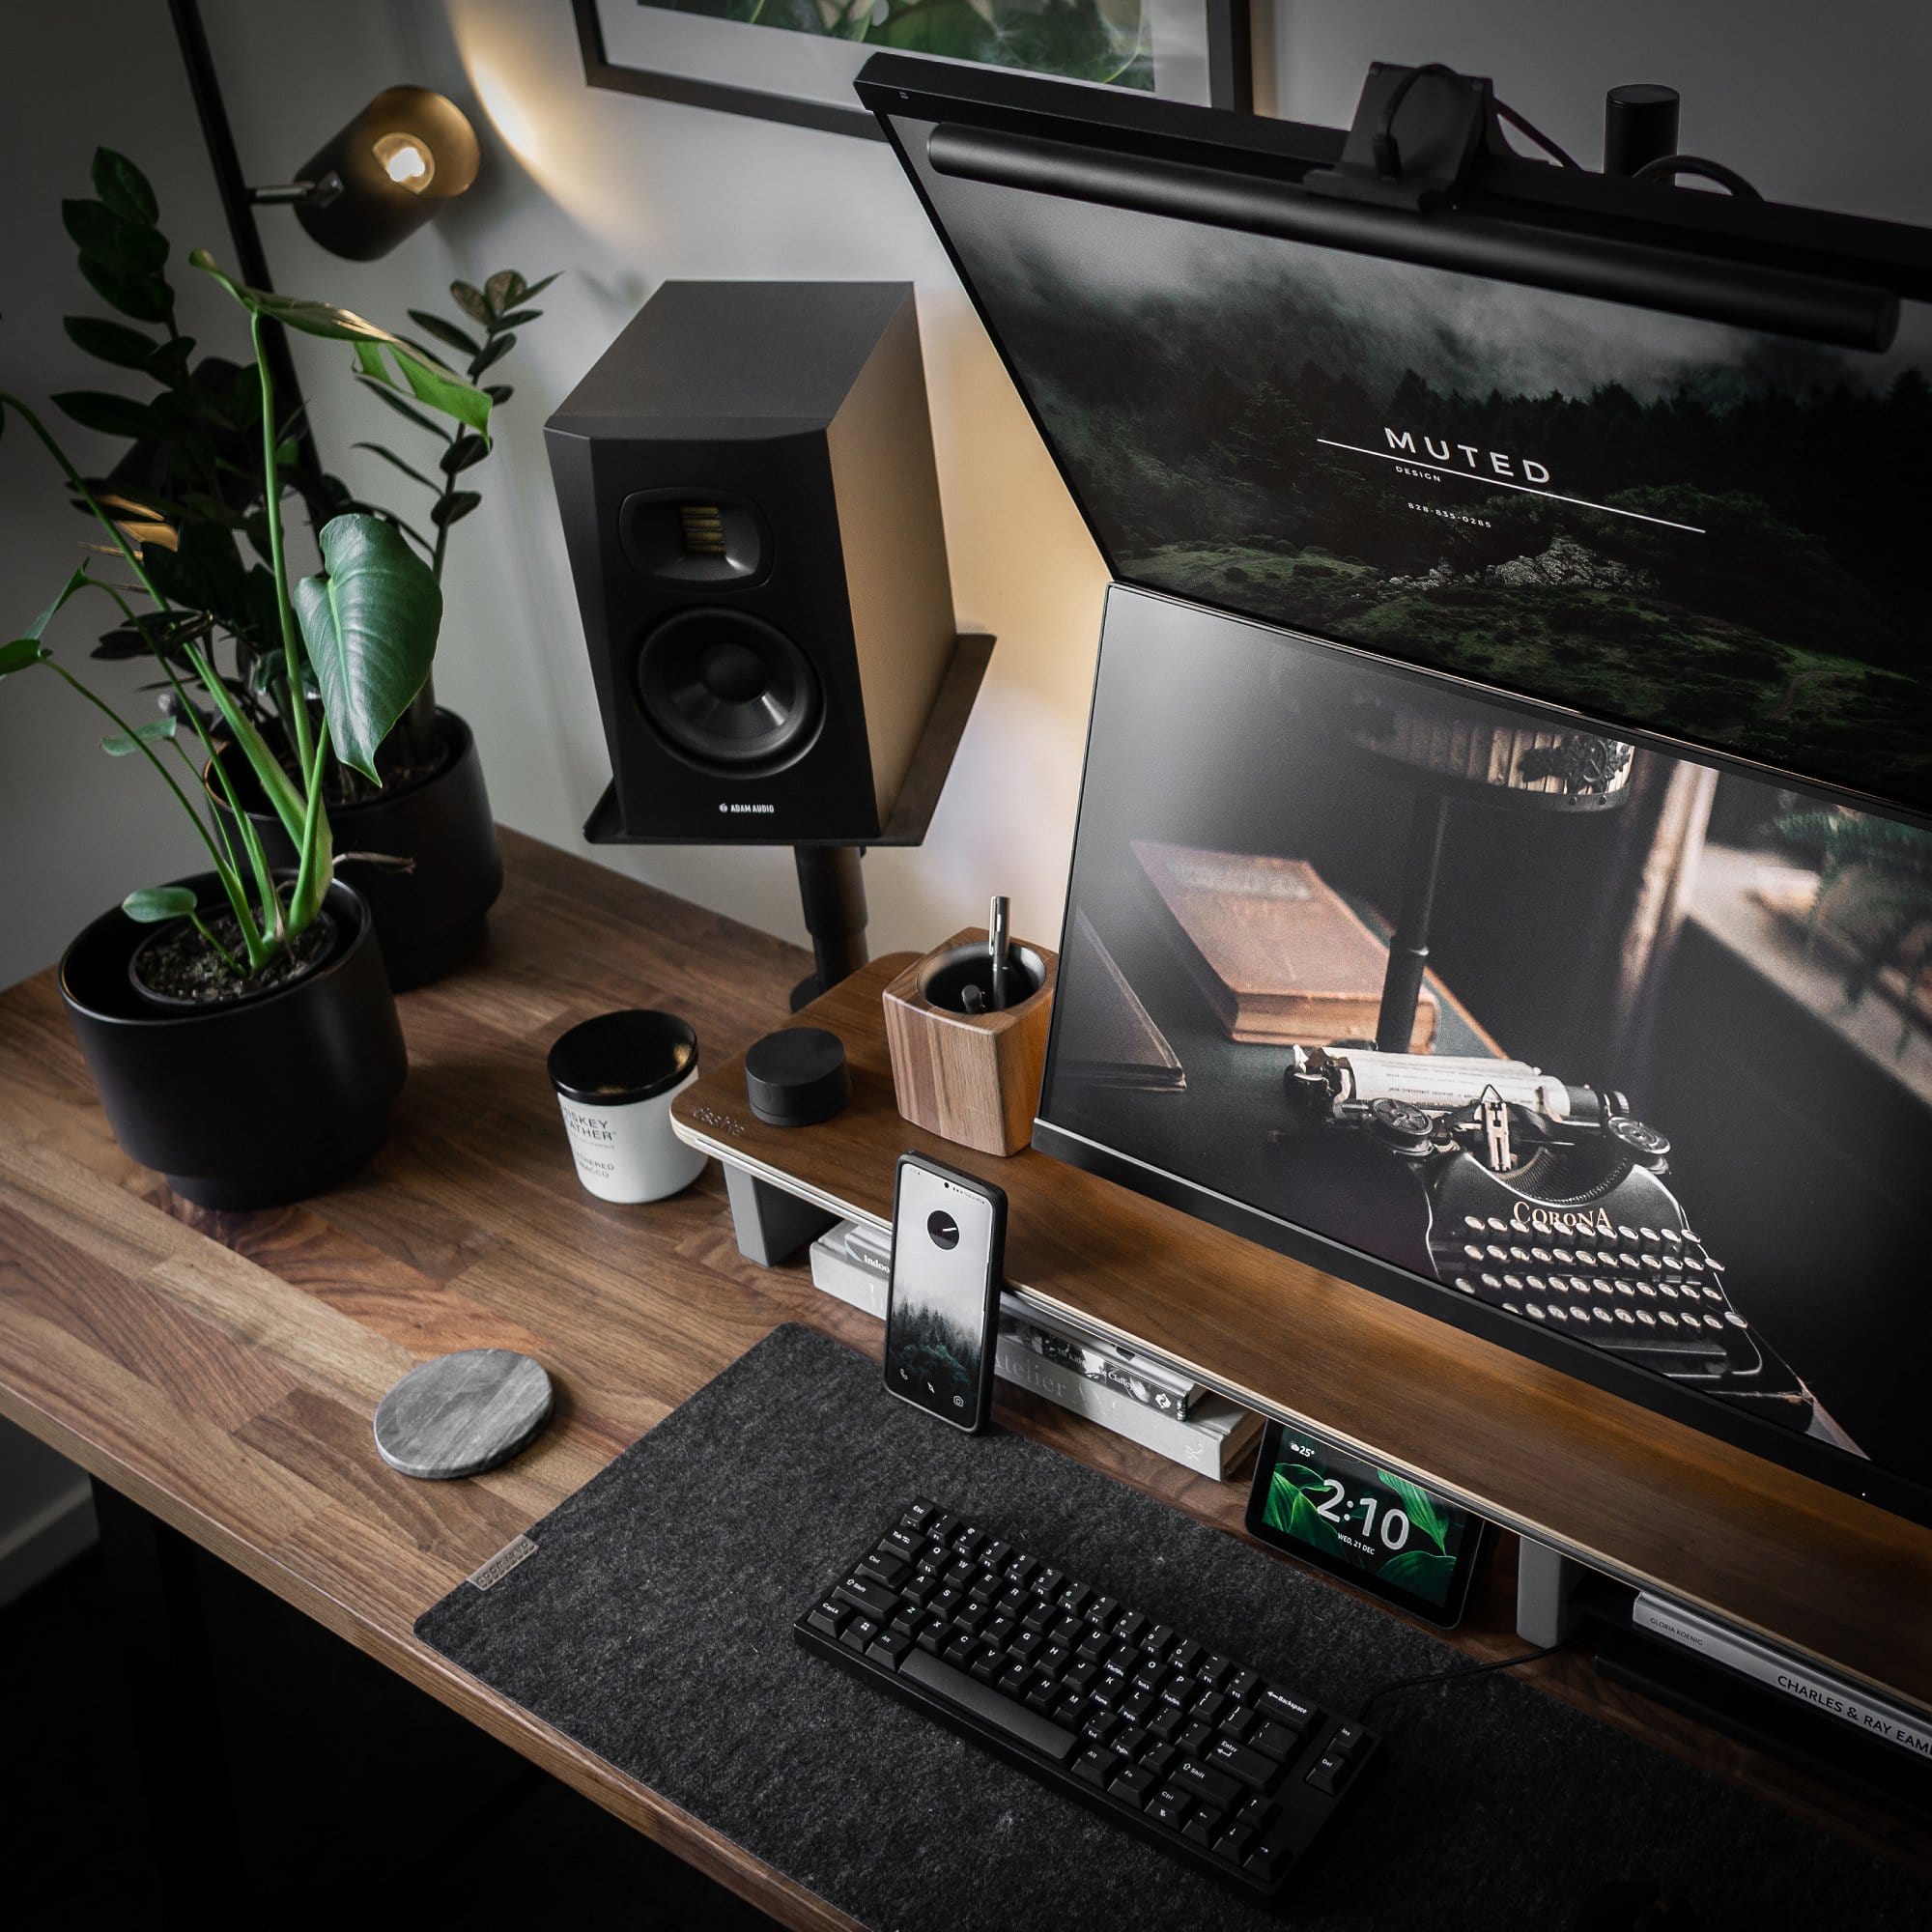 An IKEA KARLBY desk setup featuring two vertically-stacked Gigabyte M27Q monitors, ADAM Audio T5V speakers, Leopold FC660M keyboard, and some indoor plants